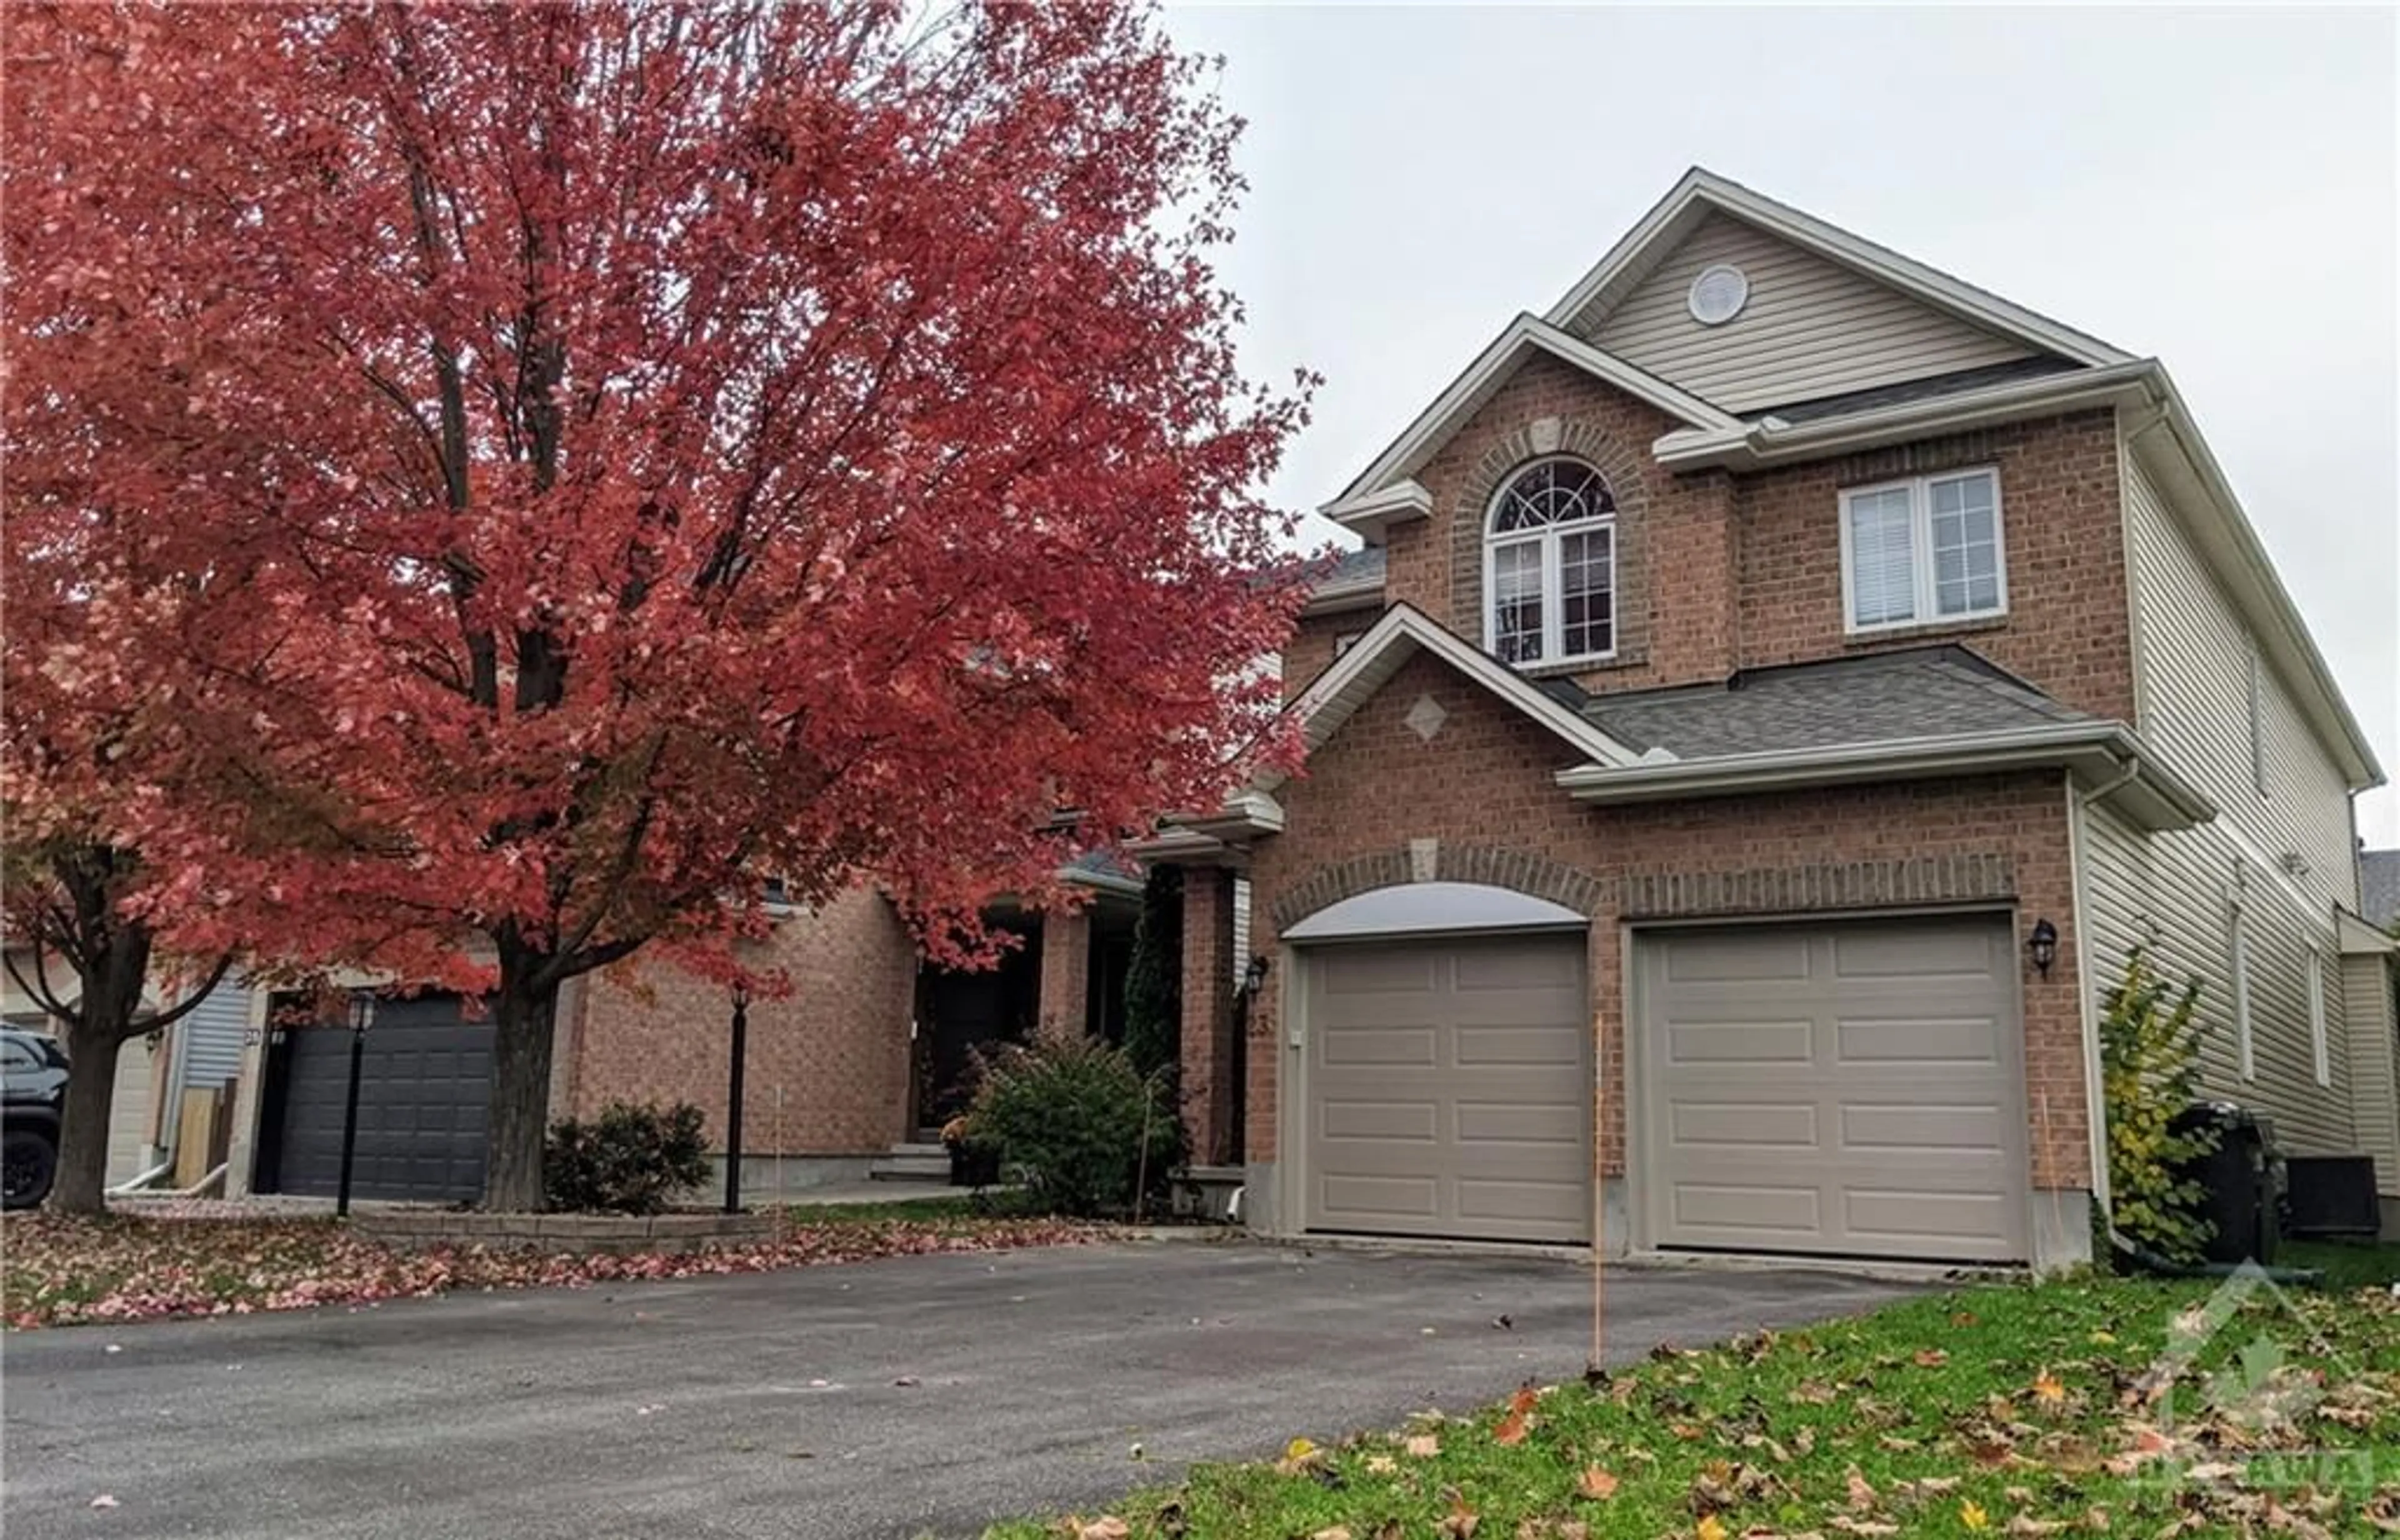 Home with brick exterior material for 23 Friendly Cres, Stittsville Ontario K2S 2E9